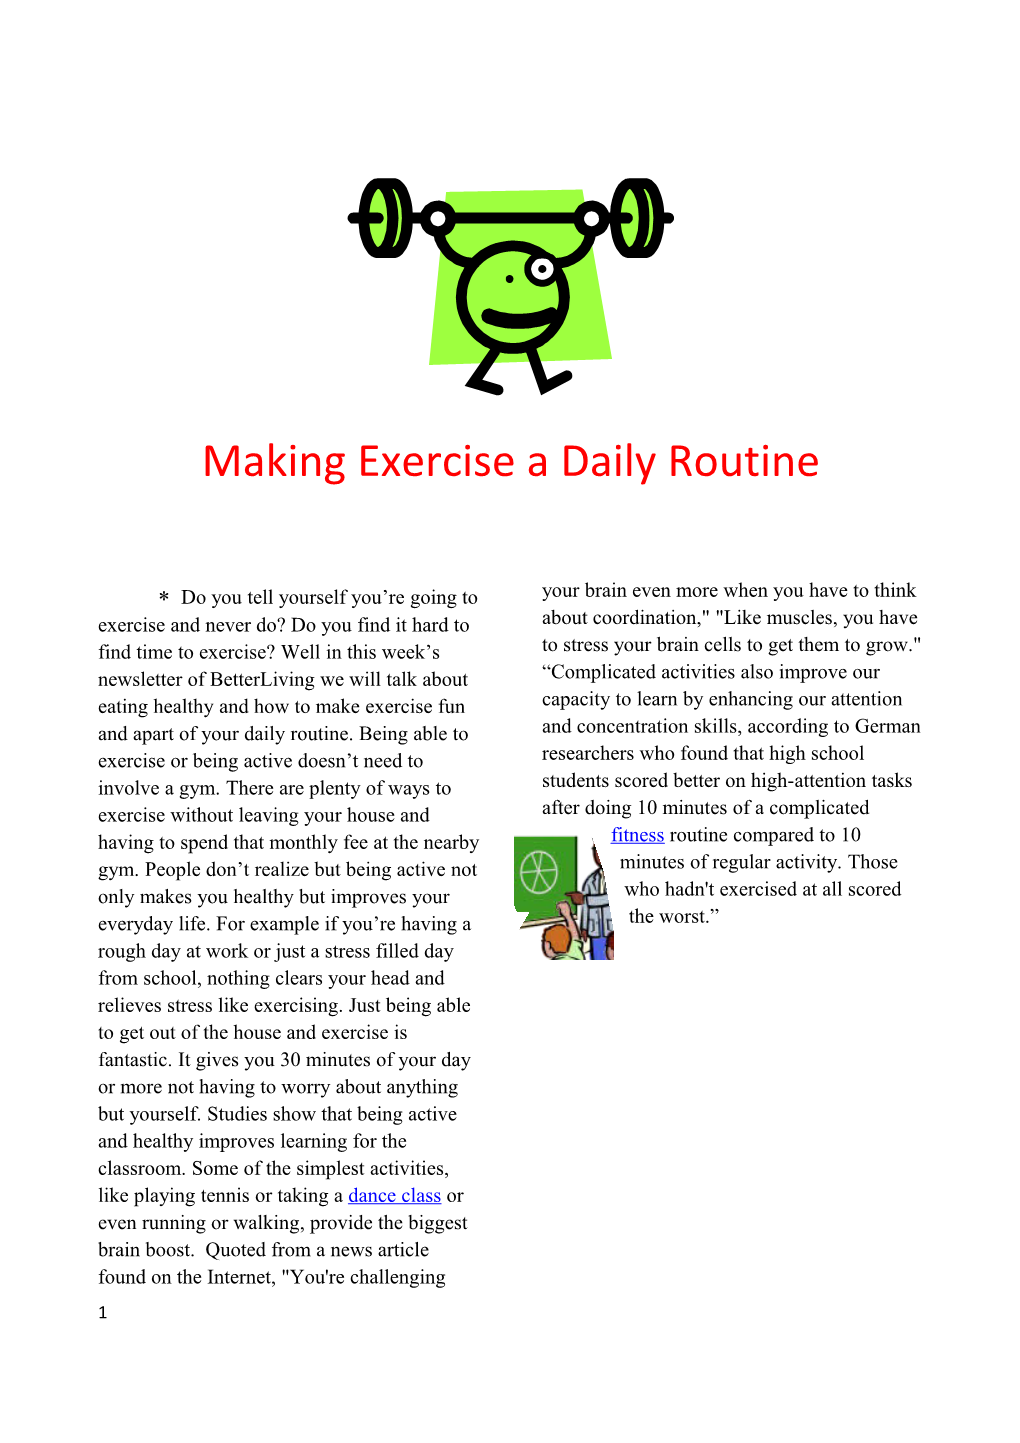 Making Exercise a Daily Routine